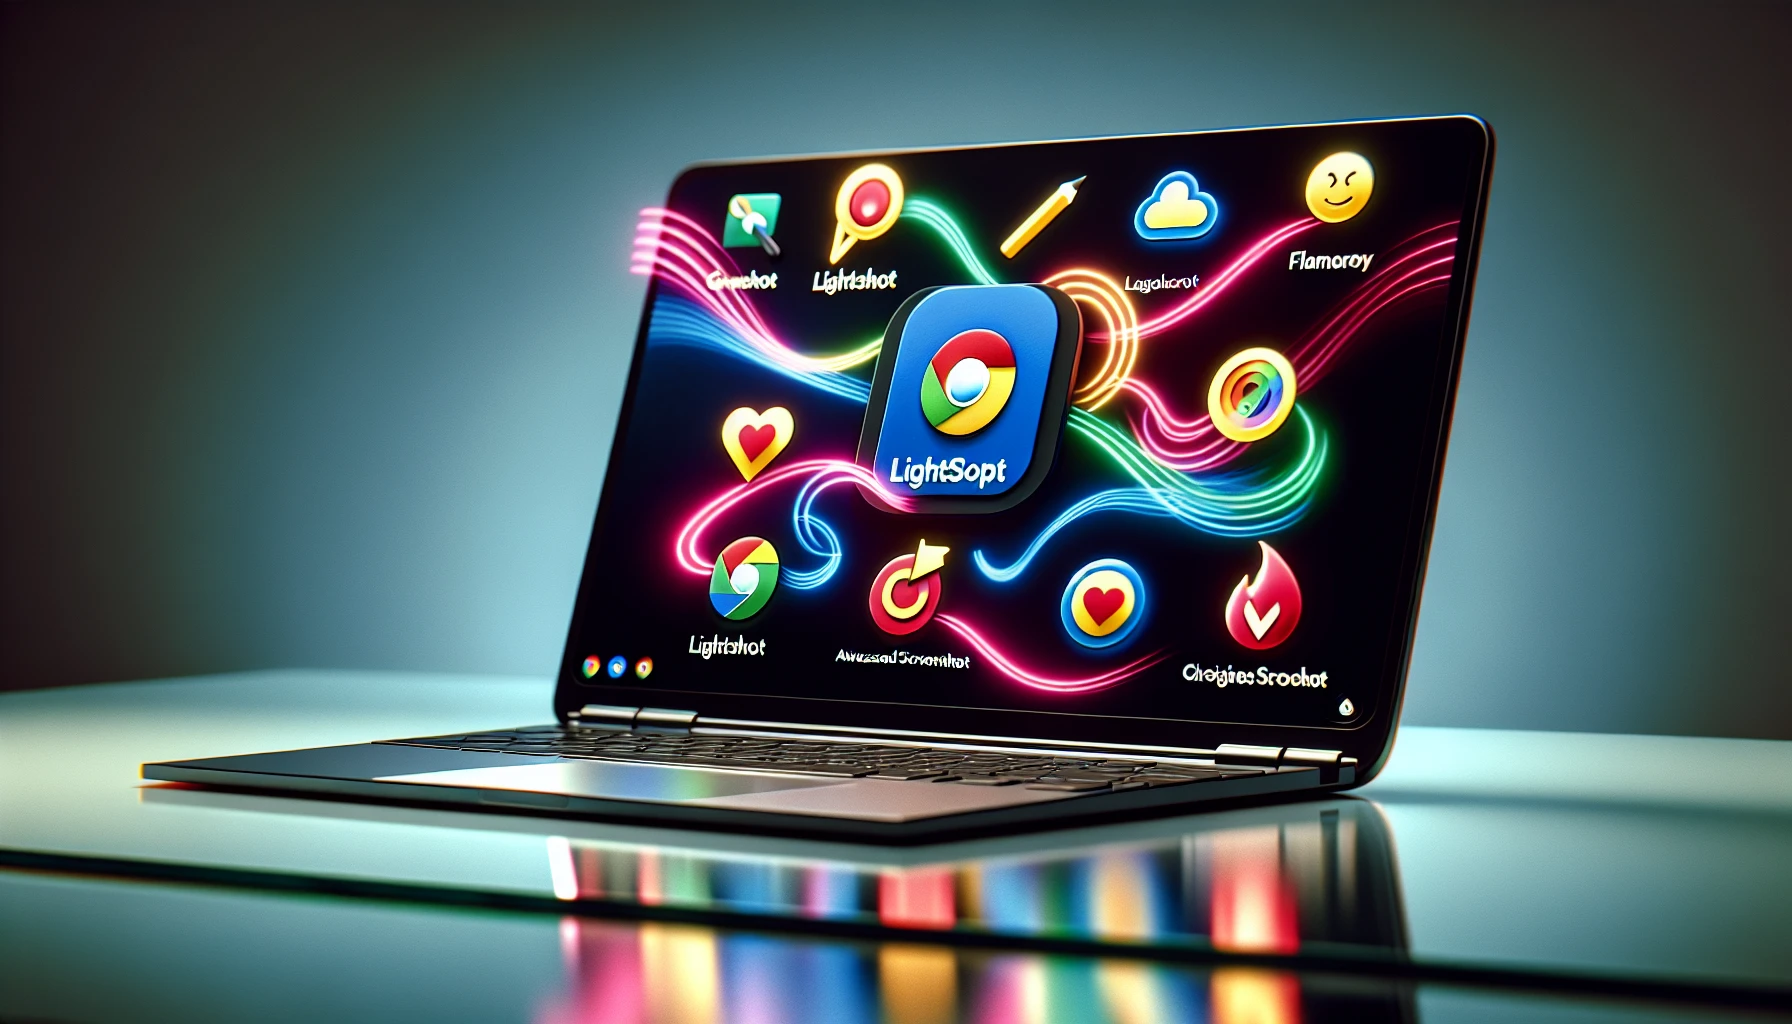 Illustration of a Chromebook with advanced screenshot tools and extensions